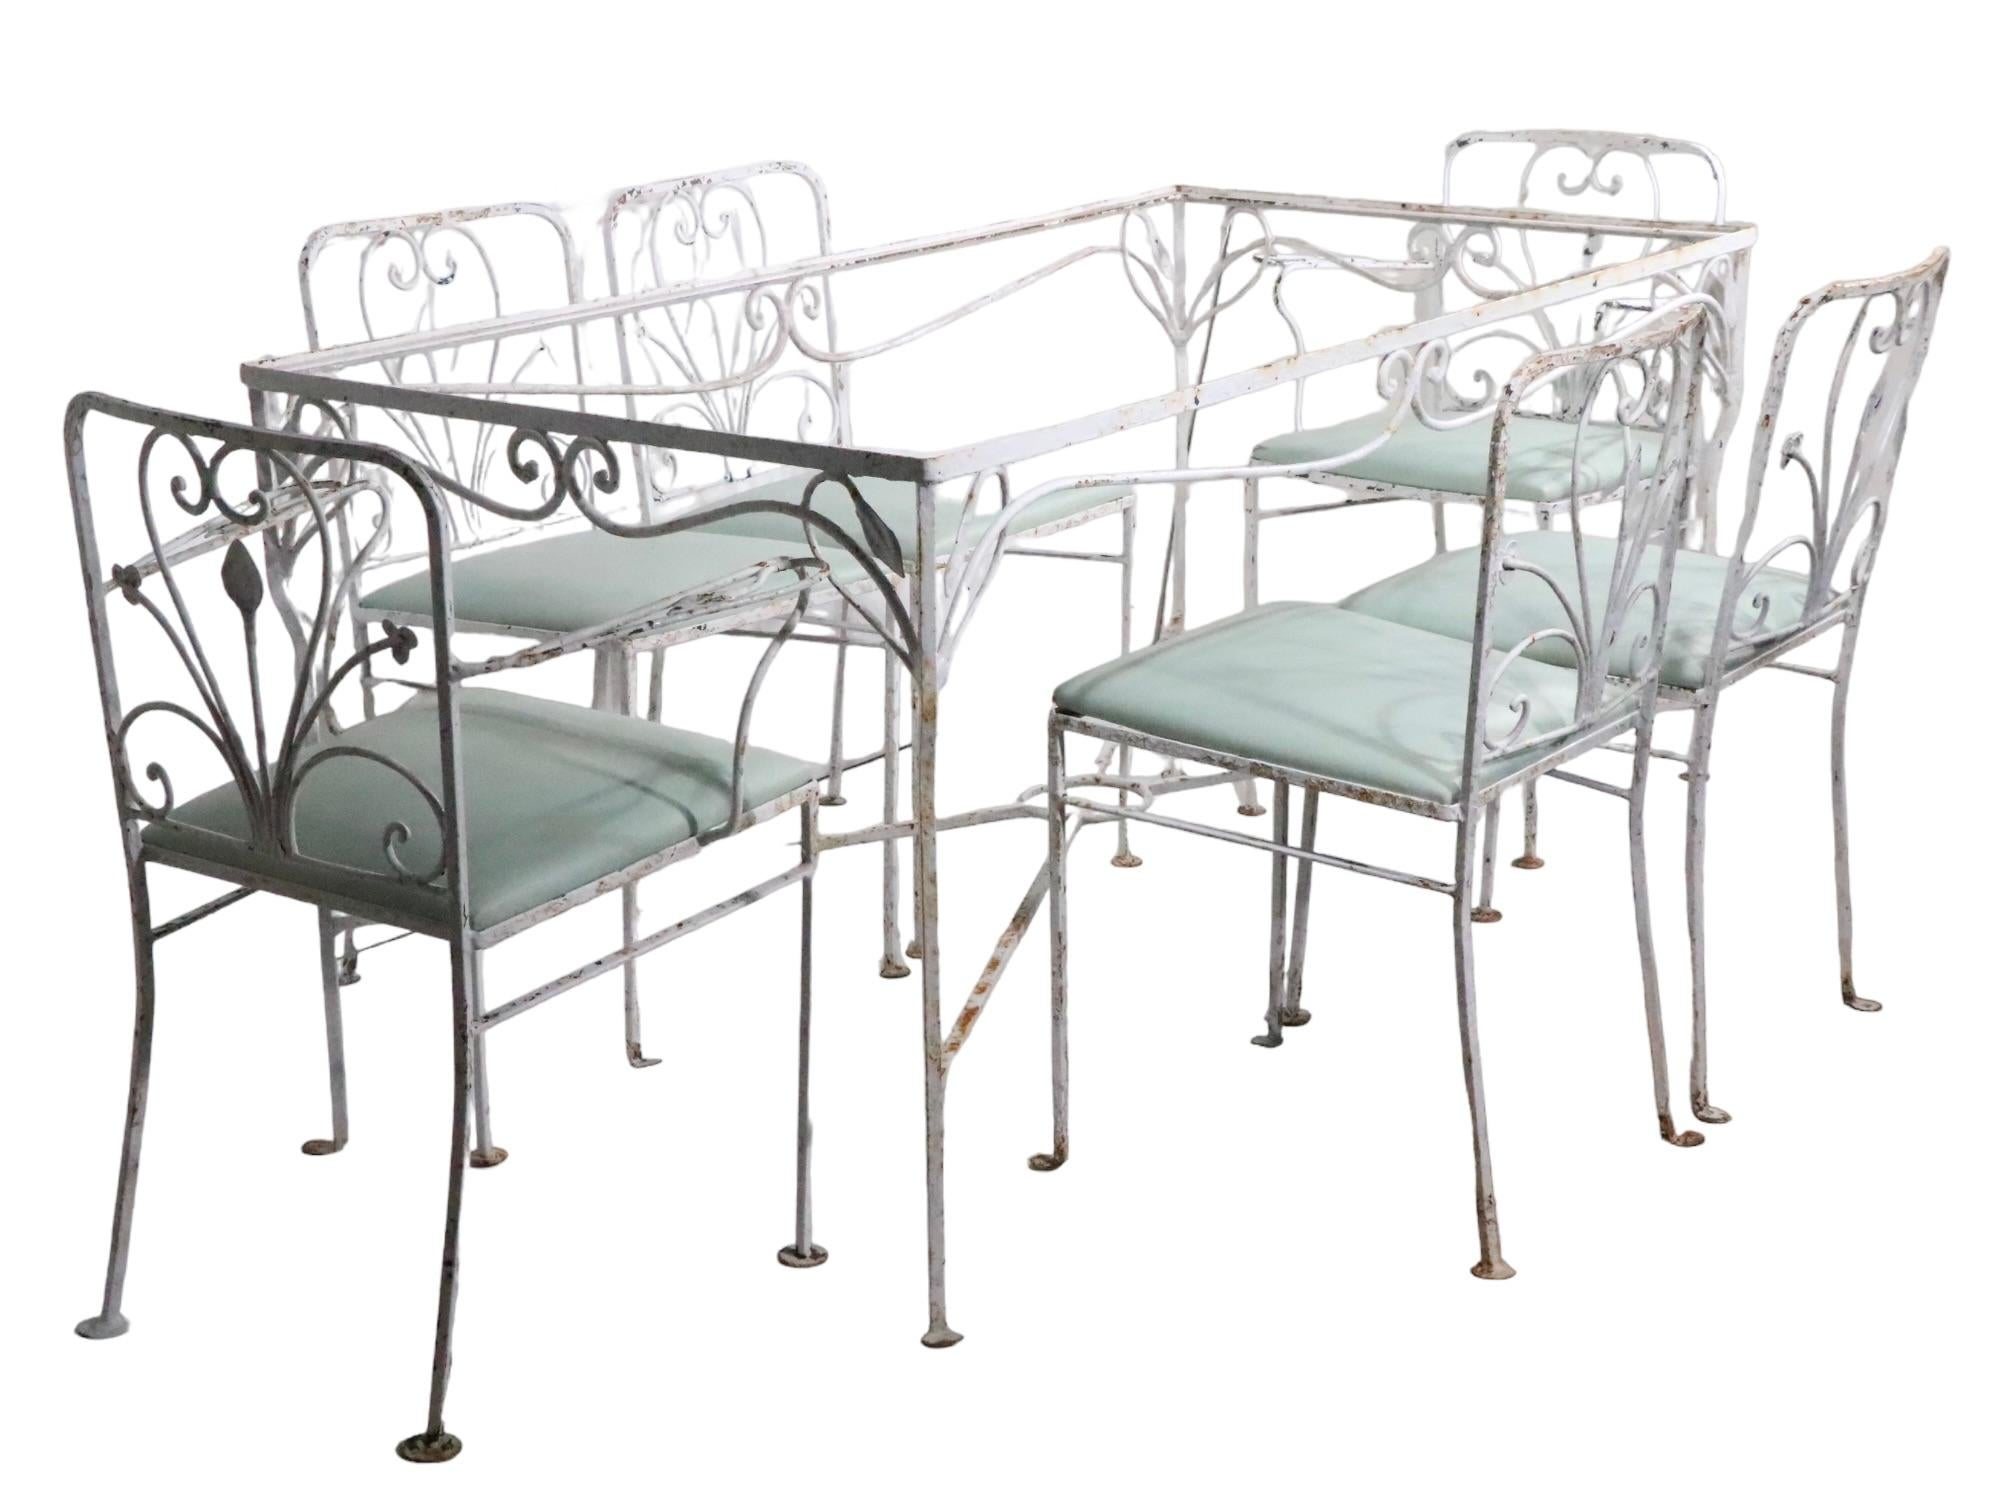 20th Century Wrought Iron Garden Patio Poolside Dining Table att. to Woodard c 1930/1950's For Sale